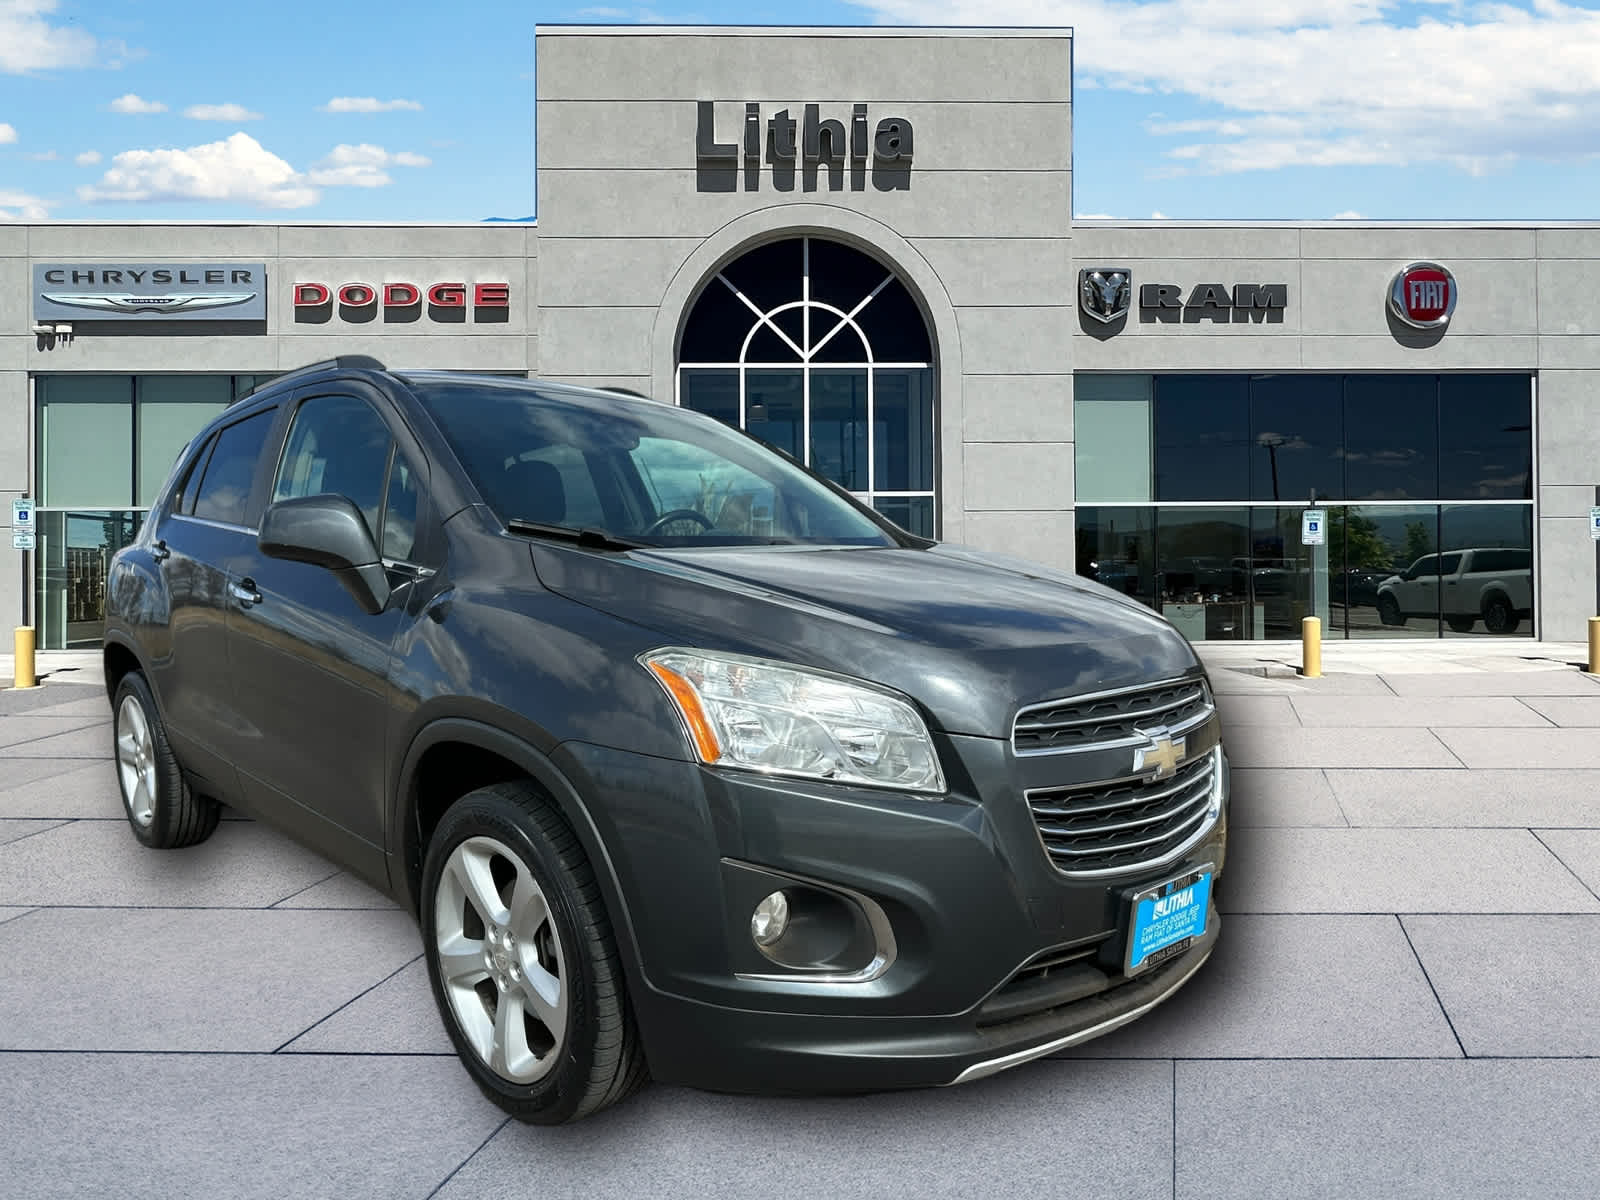 Used 2016 Chevrolet Trax LTZ with VIN 3GNCJRSB2GL181605 for sale in Santa Fe, NM